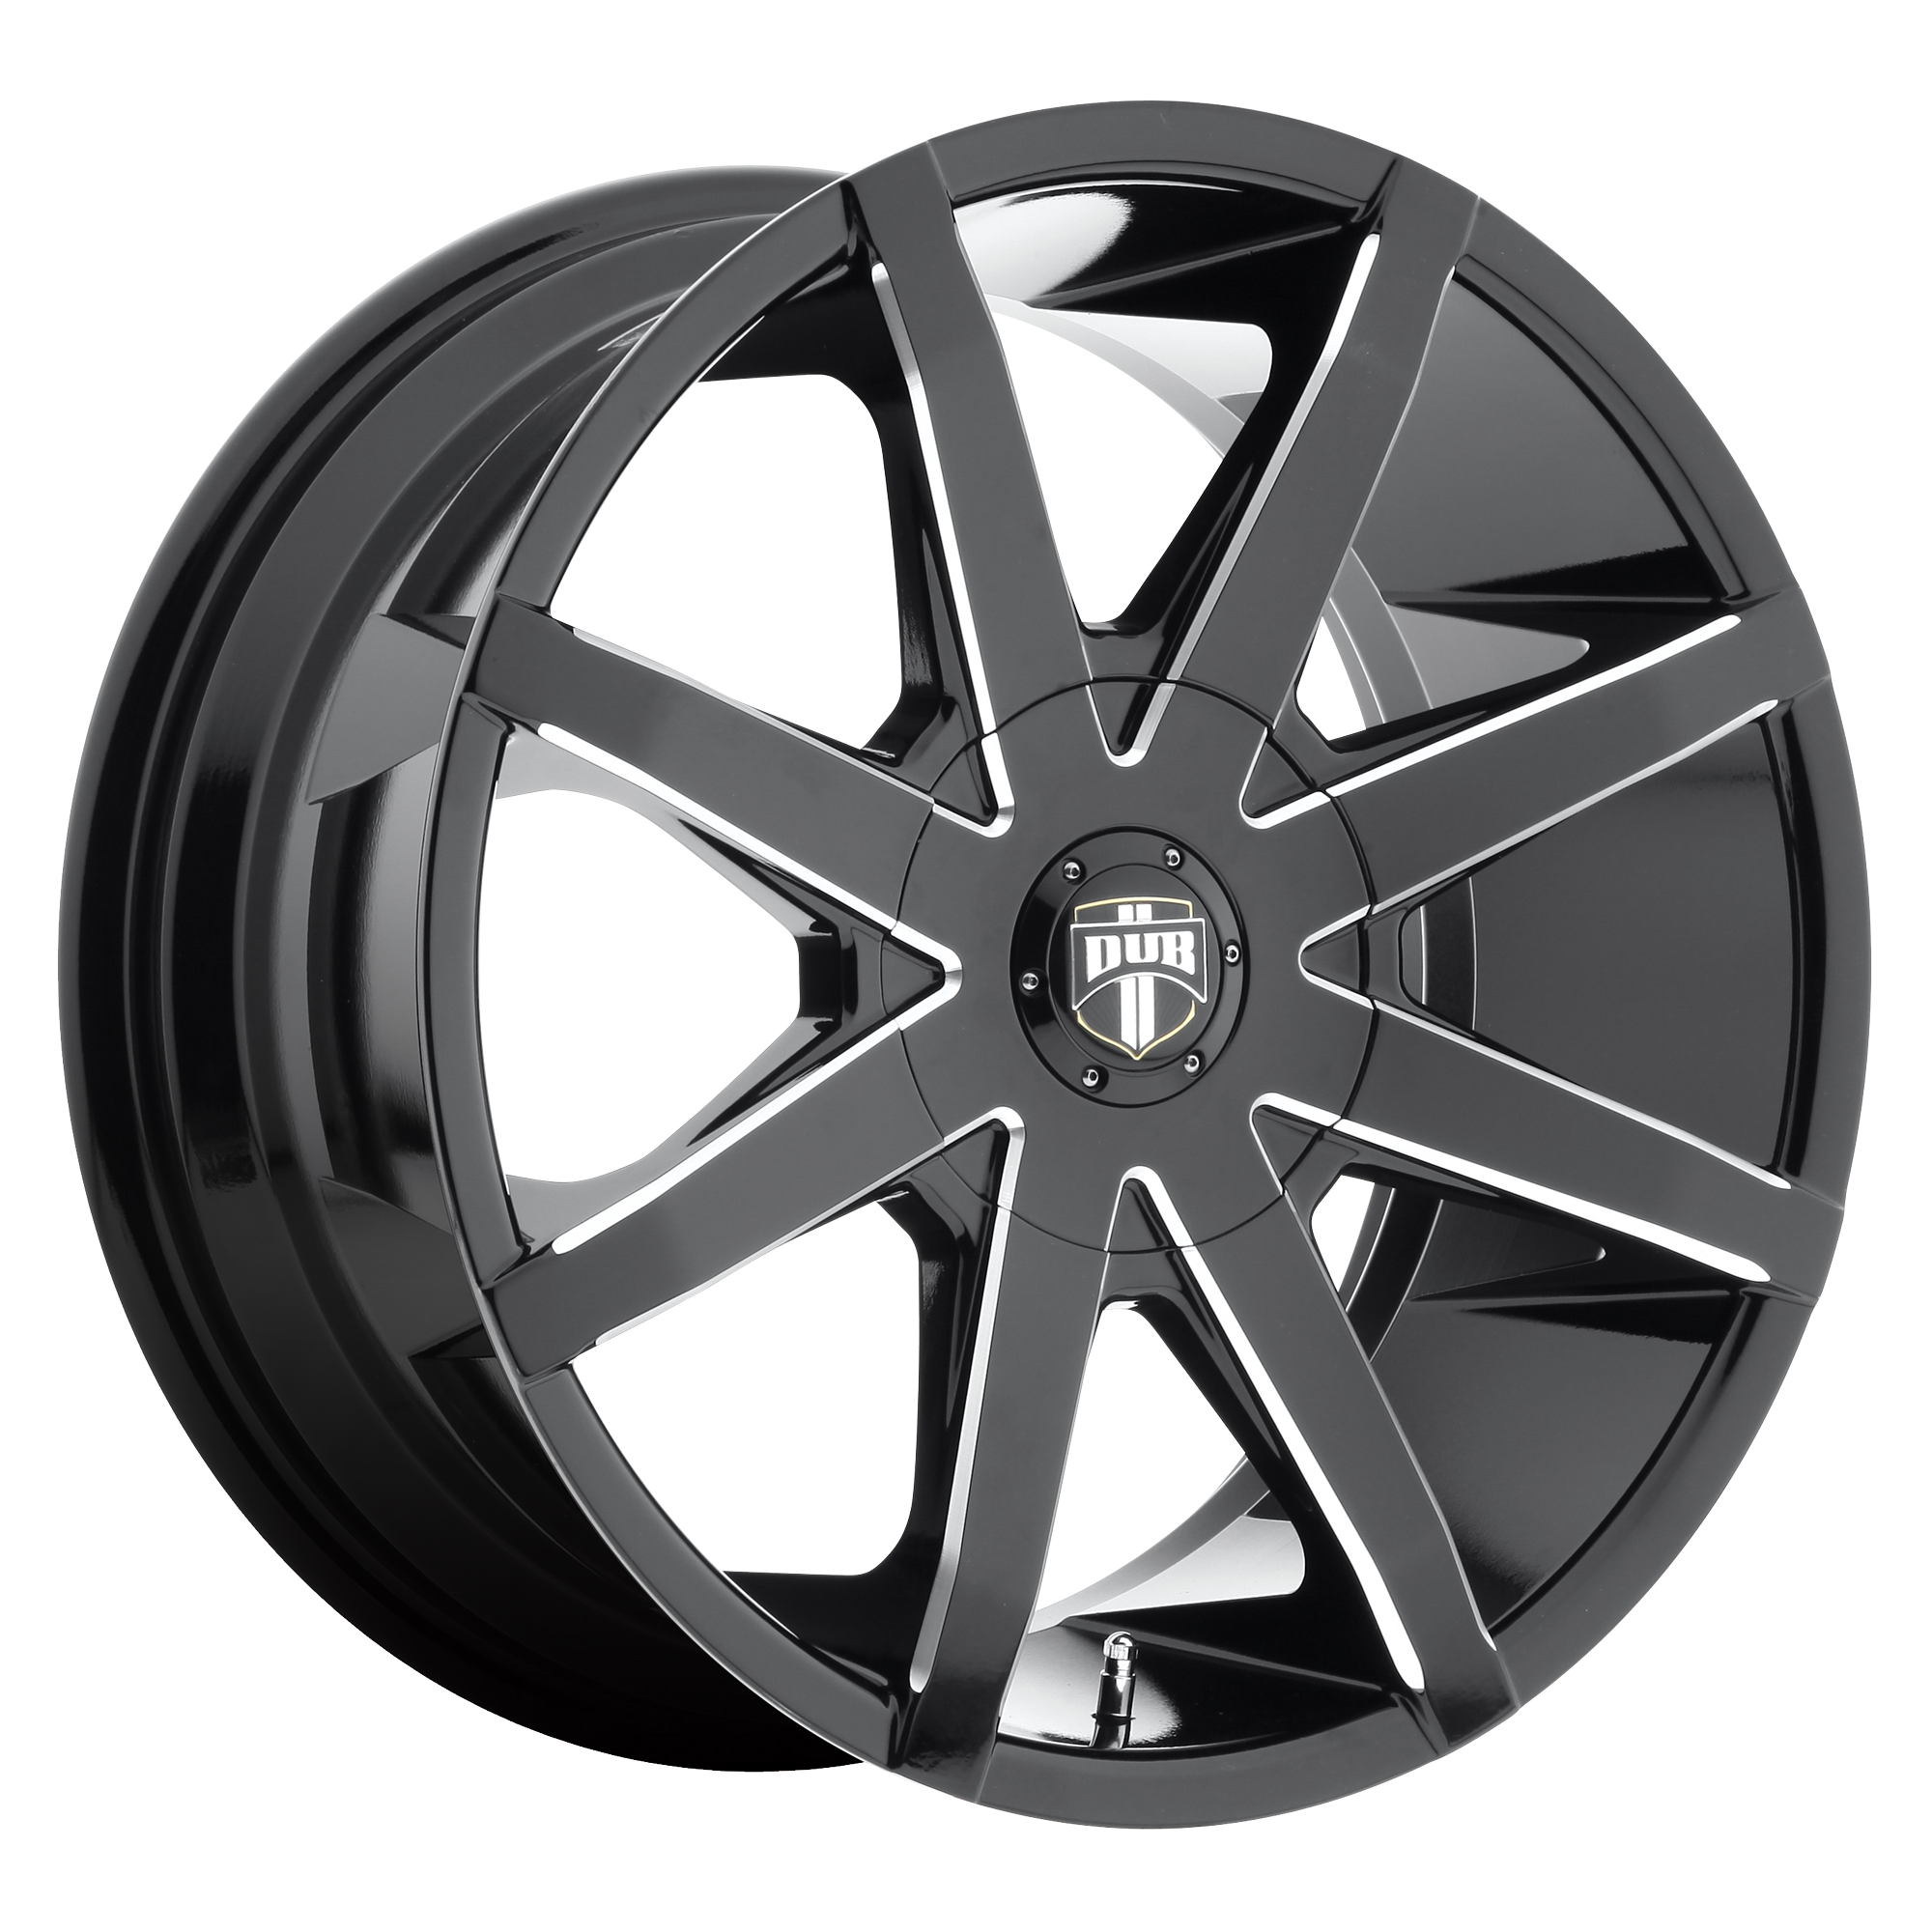 PUSH 24x9.5 5x114.30/5x120.00 GLOSS BLACK MILLED (33 mm) - Tires and Engine Performance